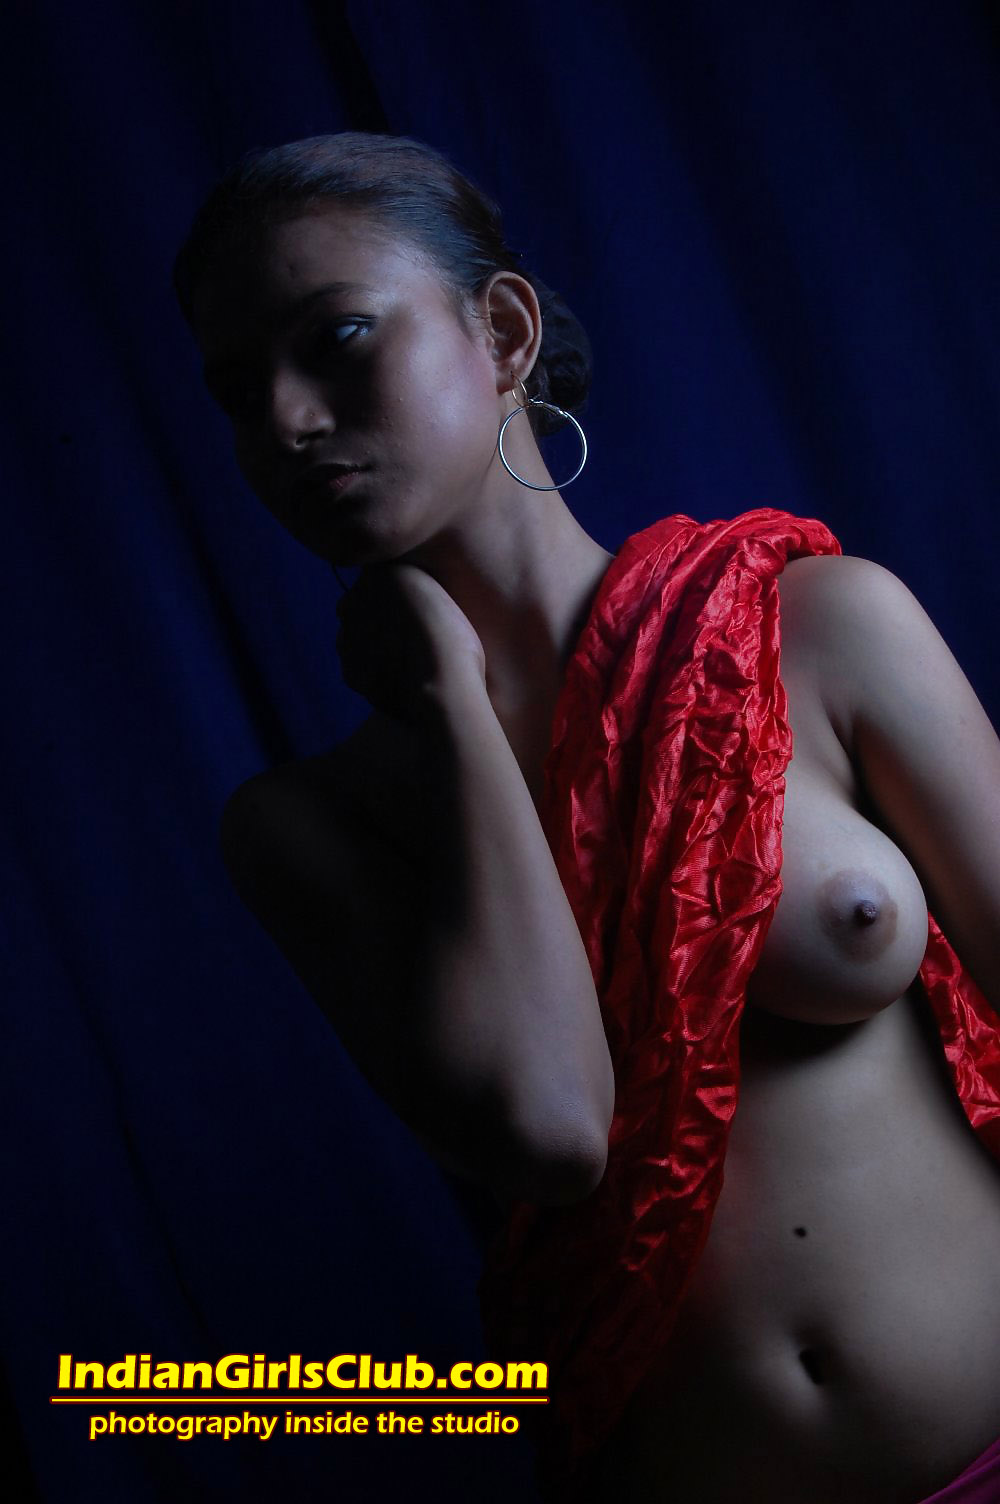 Indian Girls Nude Photography: Inside The Studio - Part 6 - Indian Girls  Club